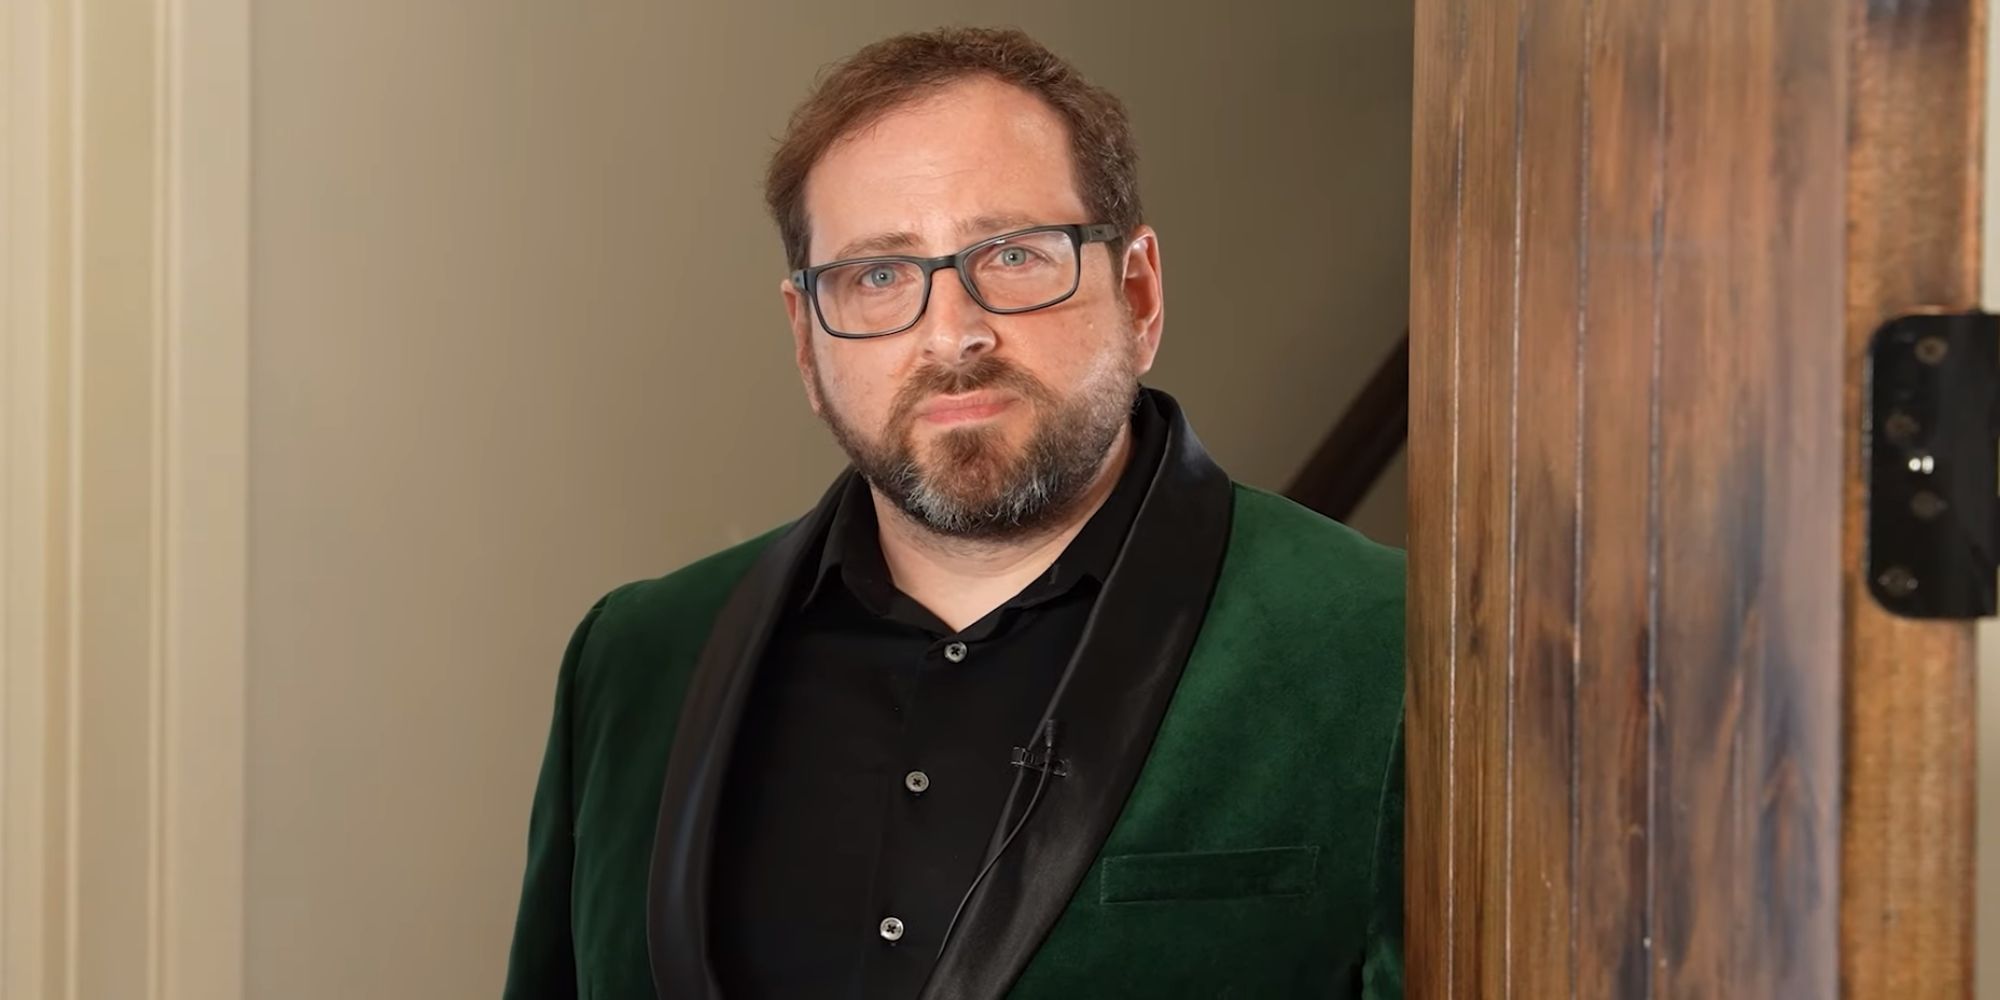 The creator of Five Nights at Freddy's, Scott Cawthon, opening the door to his home. He is wearing a green velvet suit.